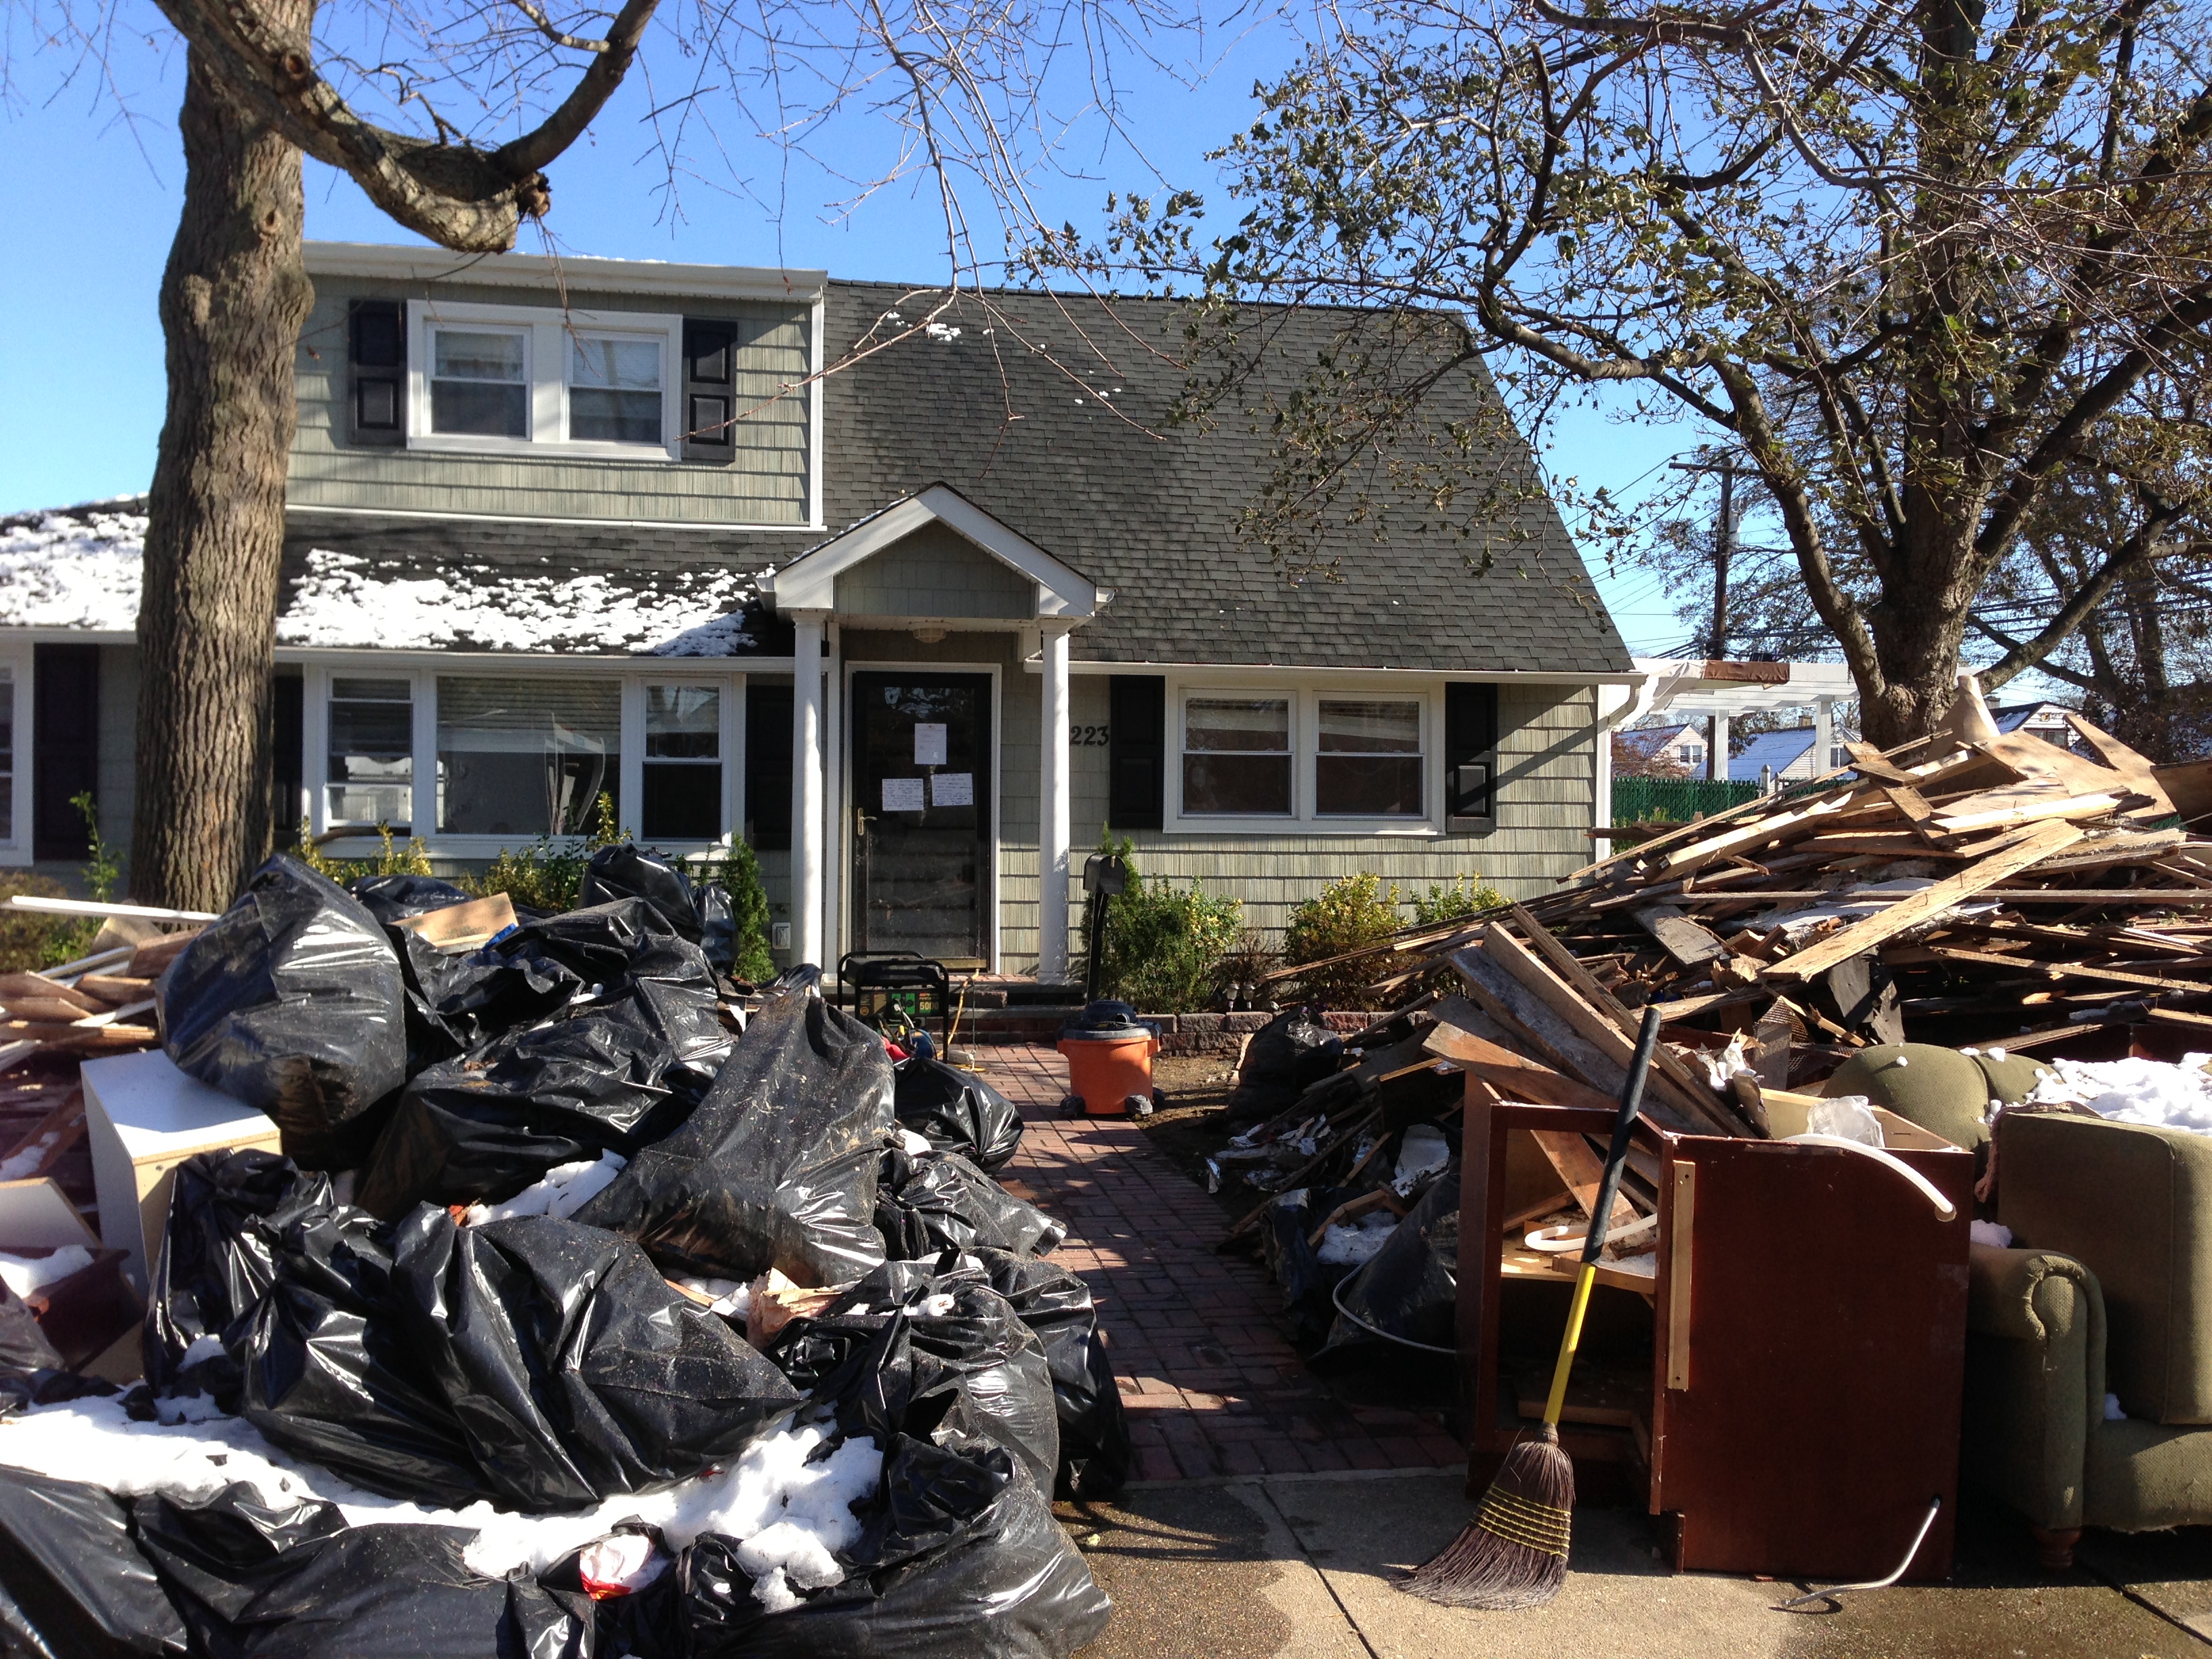 Large piles of water-logged furniture and debris clutter the streets of Oceanside, where residents held a rally Nov. 9, 2012 demanding answers and accountability from LIPA and elected officials. (Christopher Twarowski/Long Island Press)